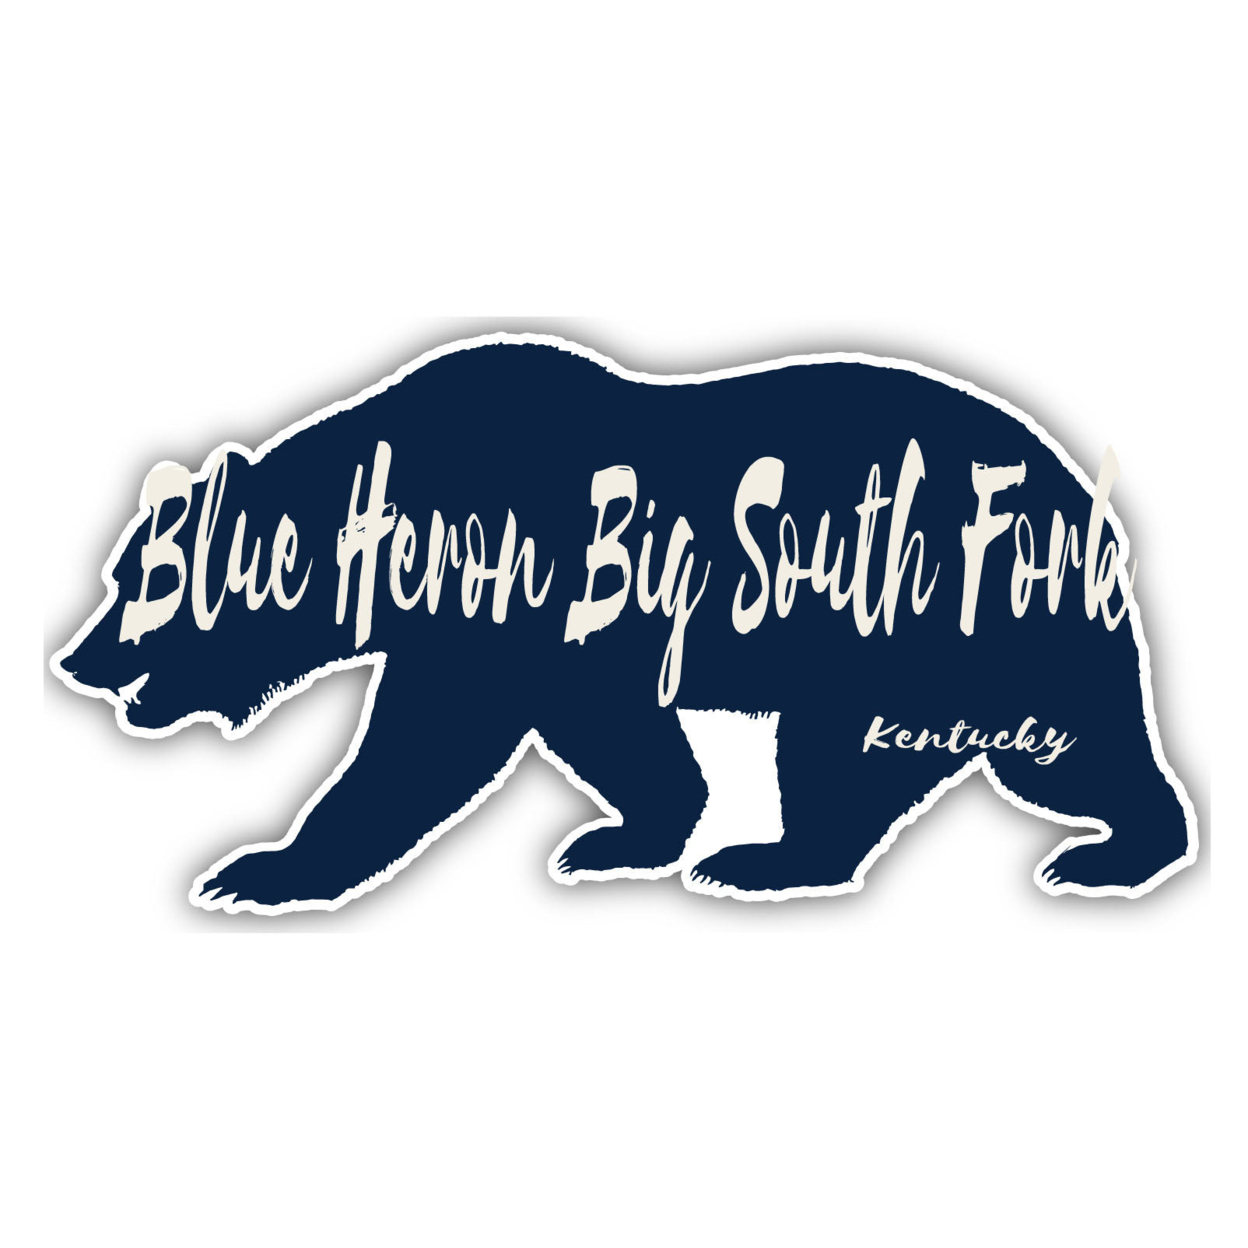 Blue Heron Big South Fork Kentucky Souvenir Decorative Stickers (Choose Theme And Size) - 4-Pack, 10-Inch, Bear